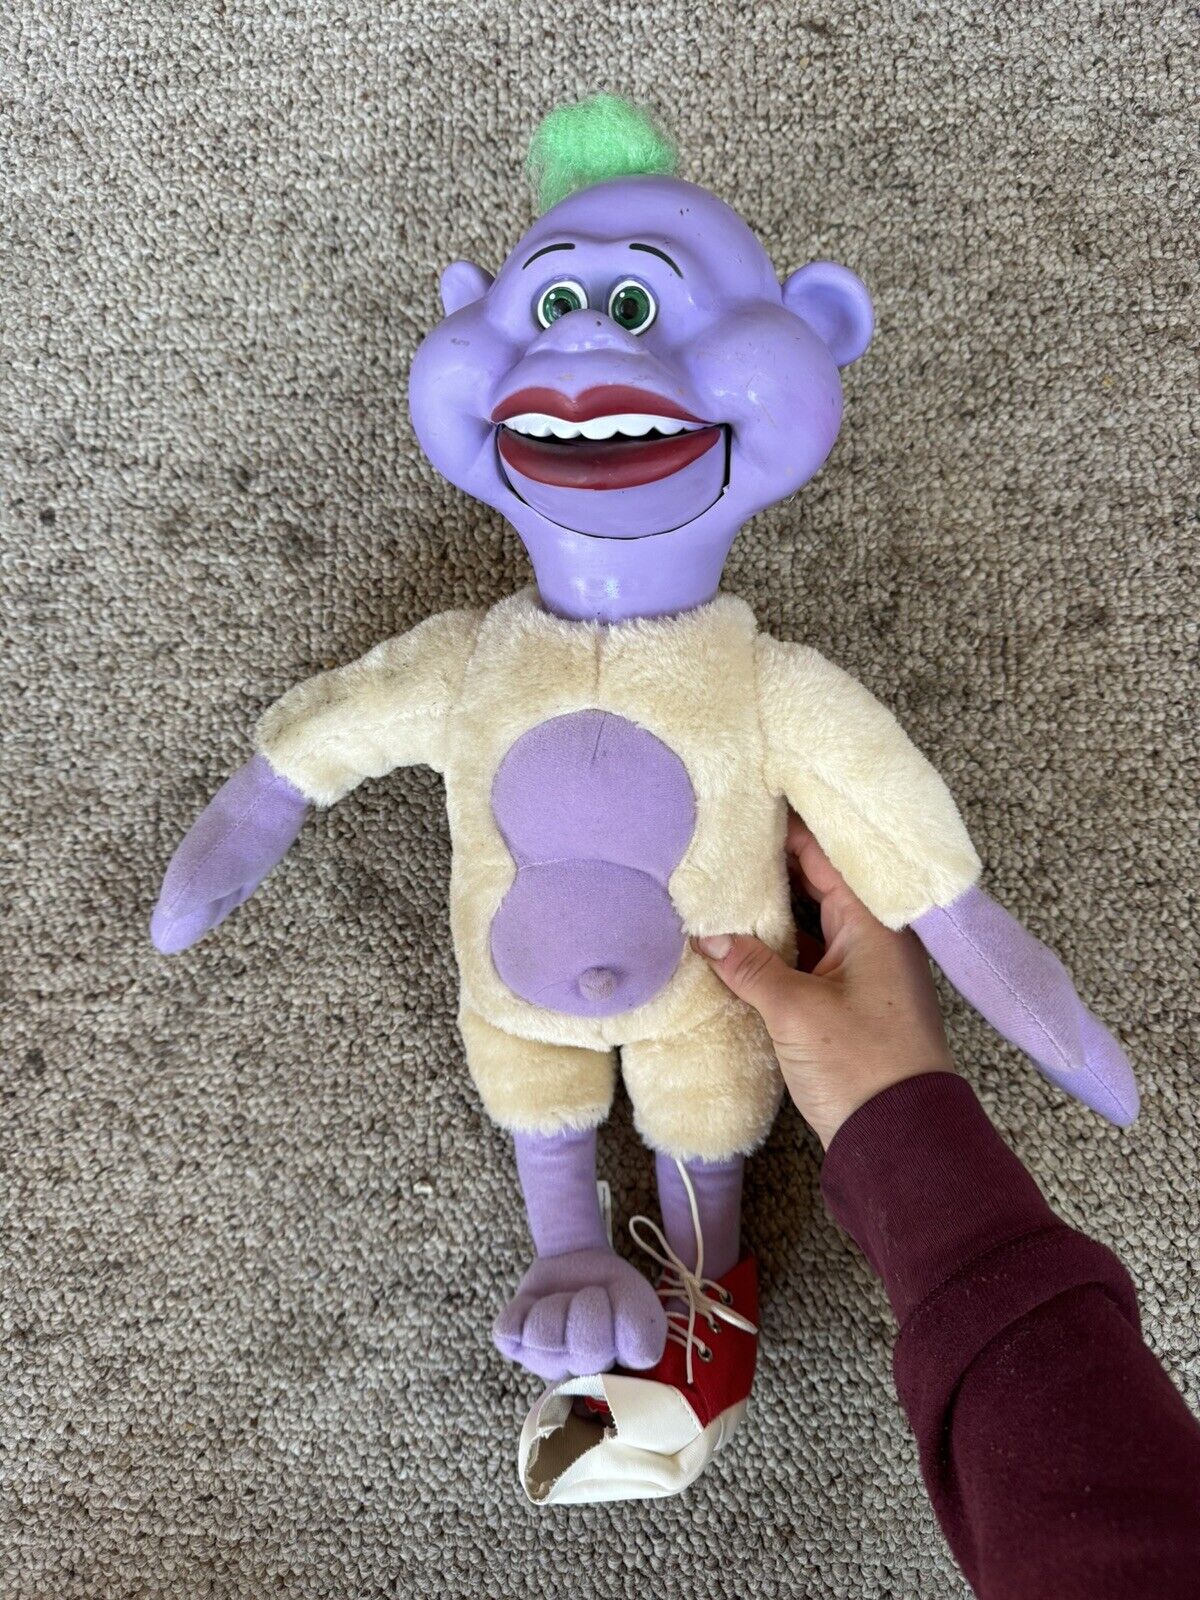 Jeff Dunham Talking Peanut 2012 Plush Doll 18 inch - Tested and Working